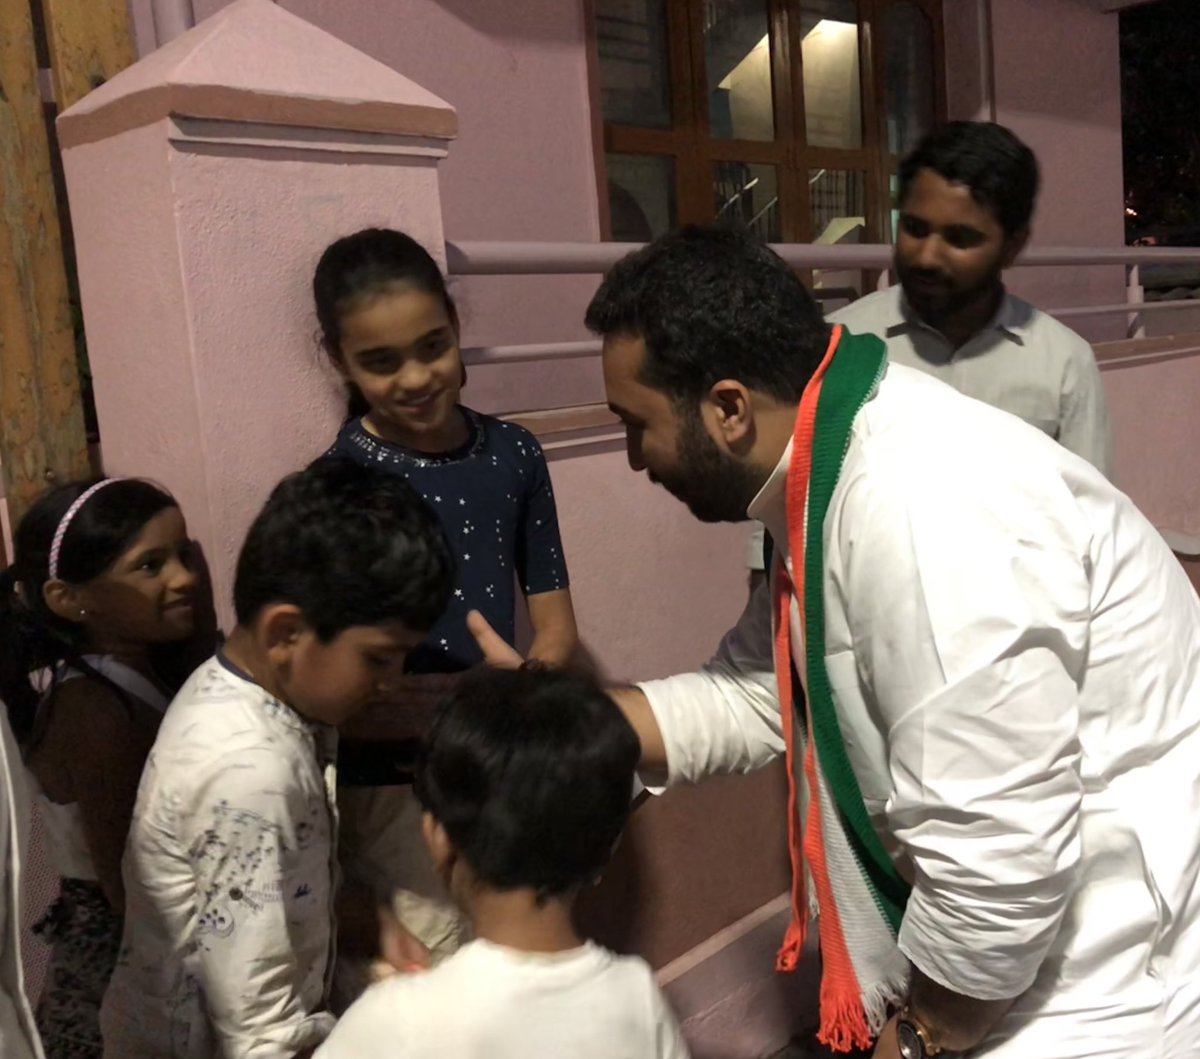 Even kids of Karnataka is telling #JaiHoCongress. A light moment from the election campaign for @manjunathansui @MahalakshmiLayout
#ProgressWithCongress